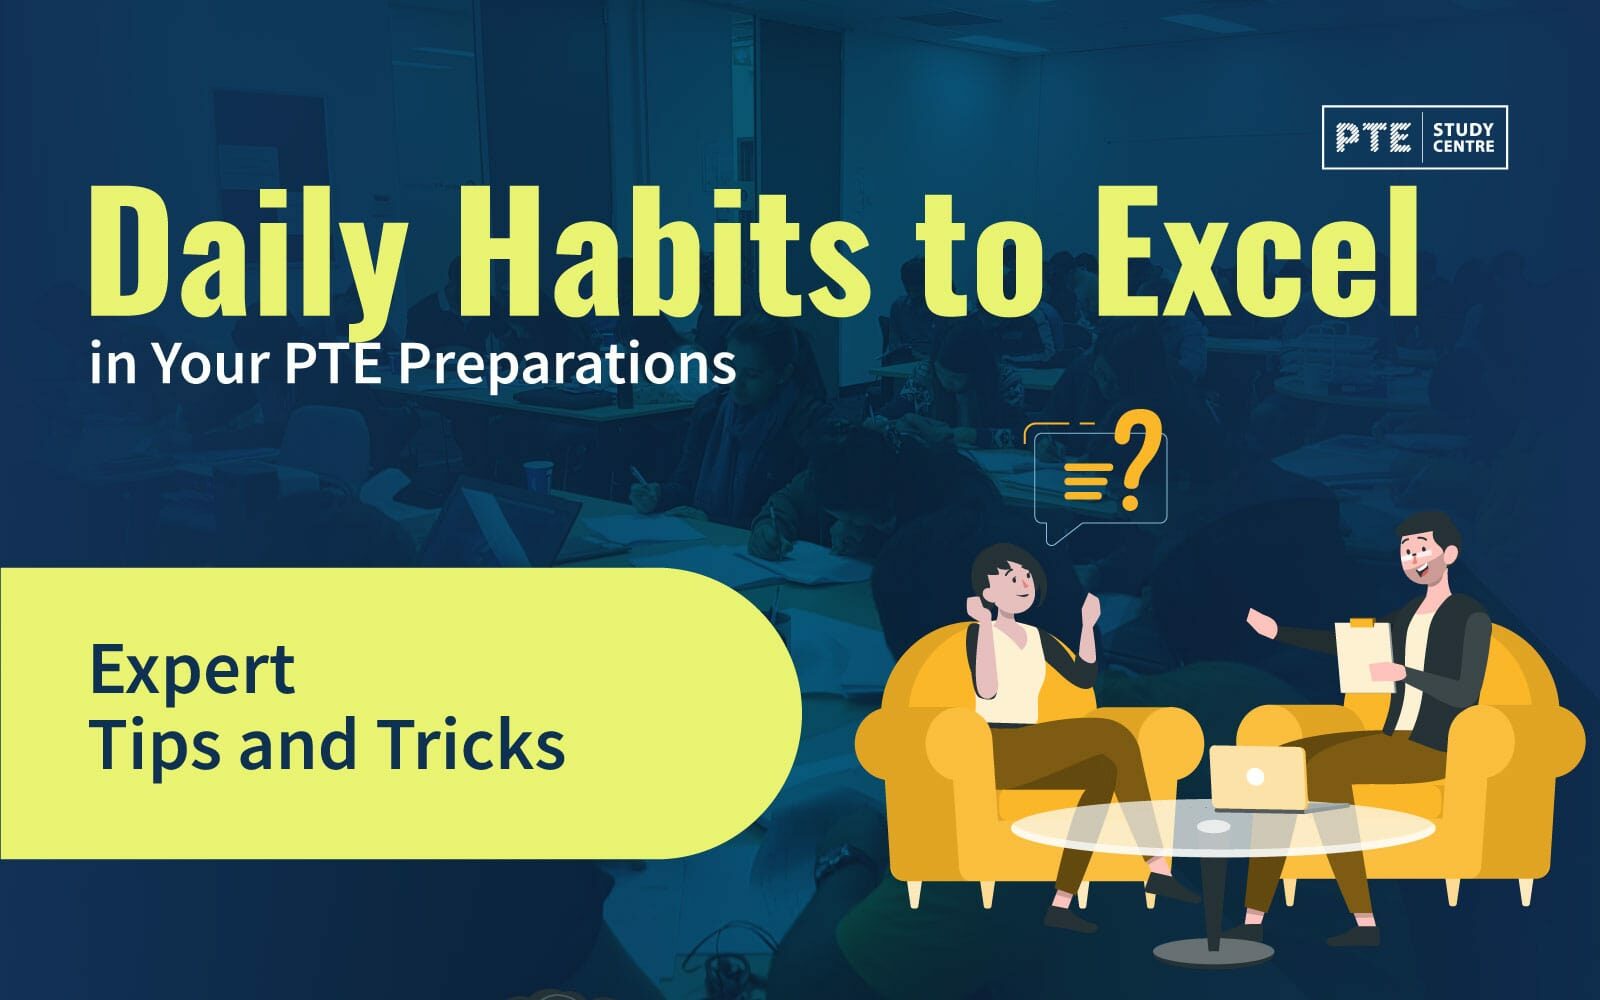 Daily Habits to Excel in Your PTE Preparations